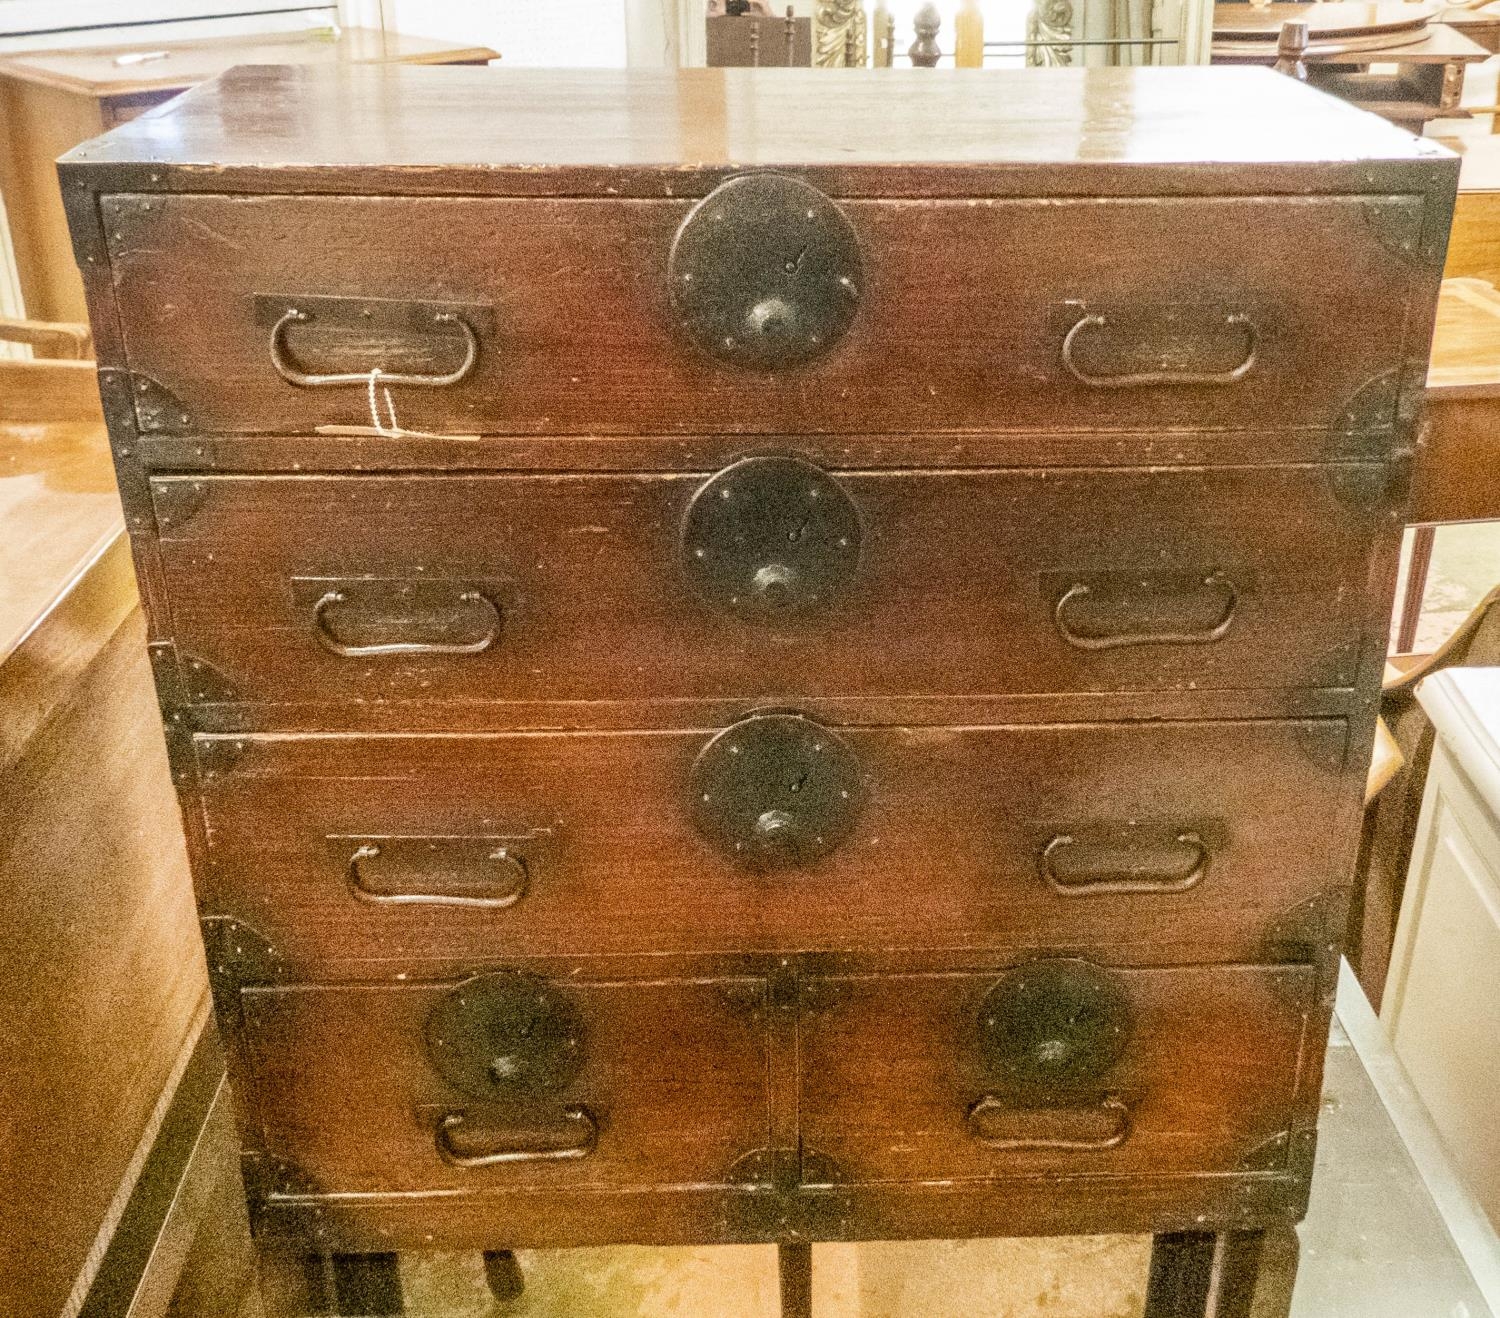 TANSU, late 19th century Japanese, firwood and iron bound of compact proportions, with five drawers, - Image 2 of 6